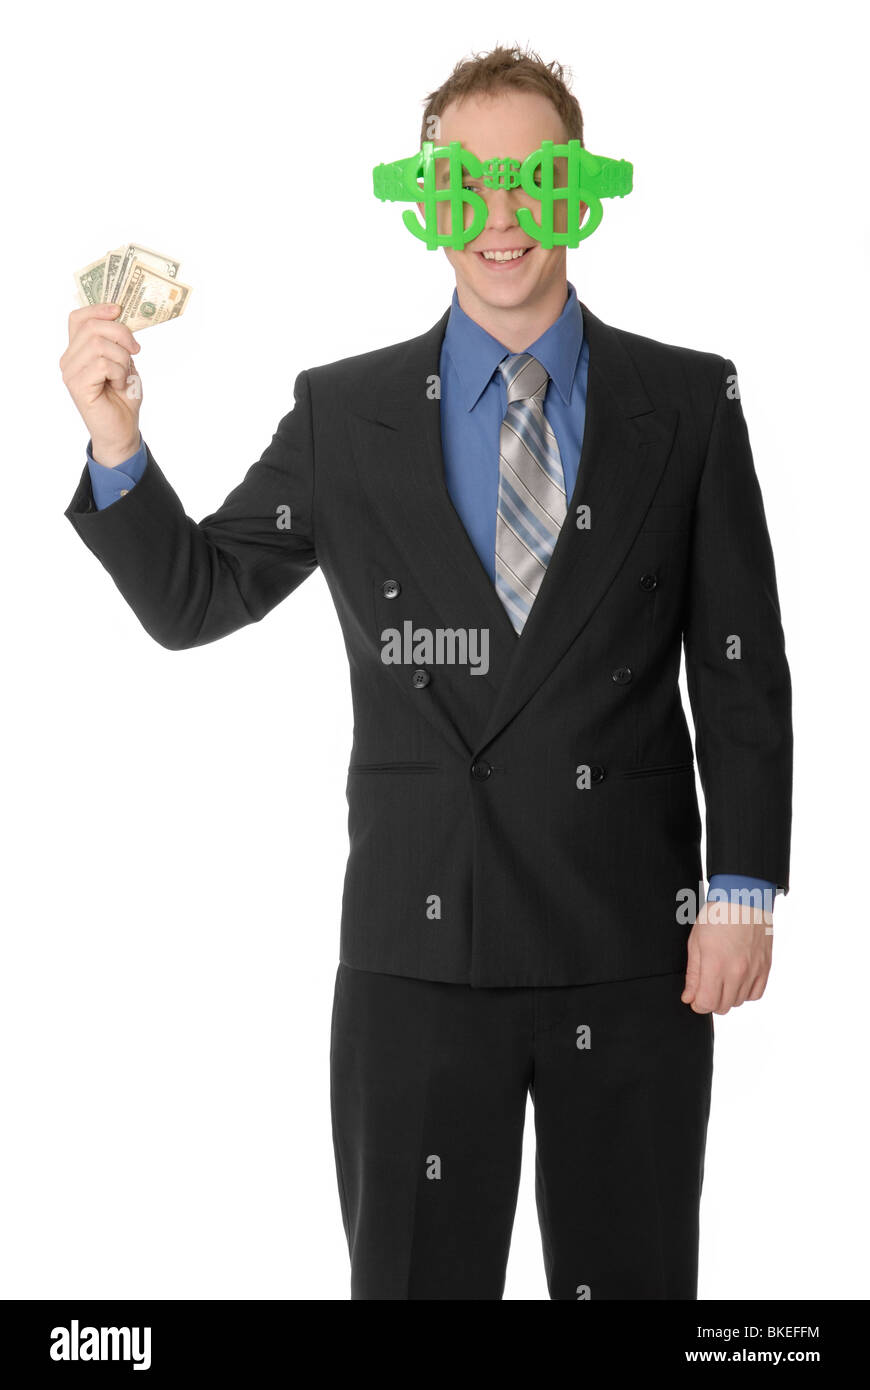 Business man with dollar sign glasses and money. Stock Photo